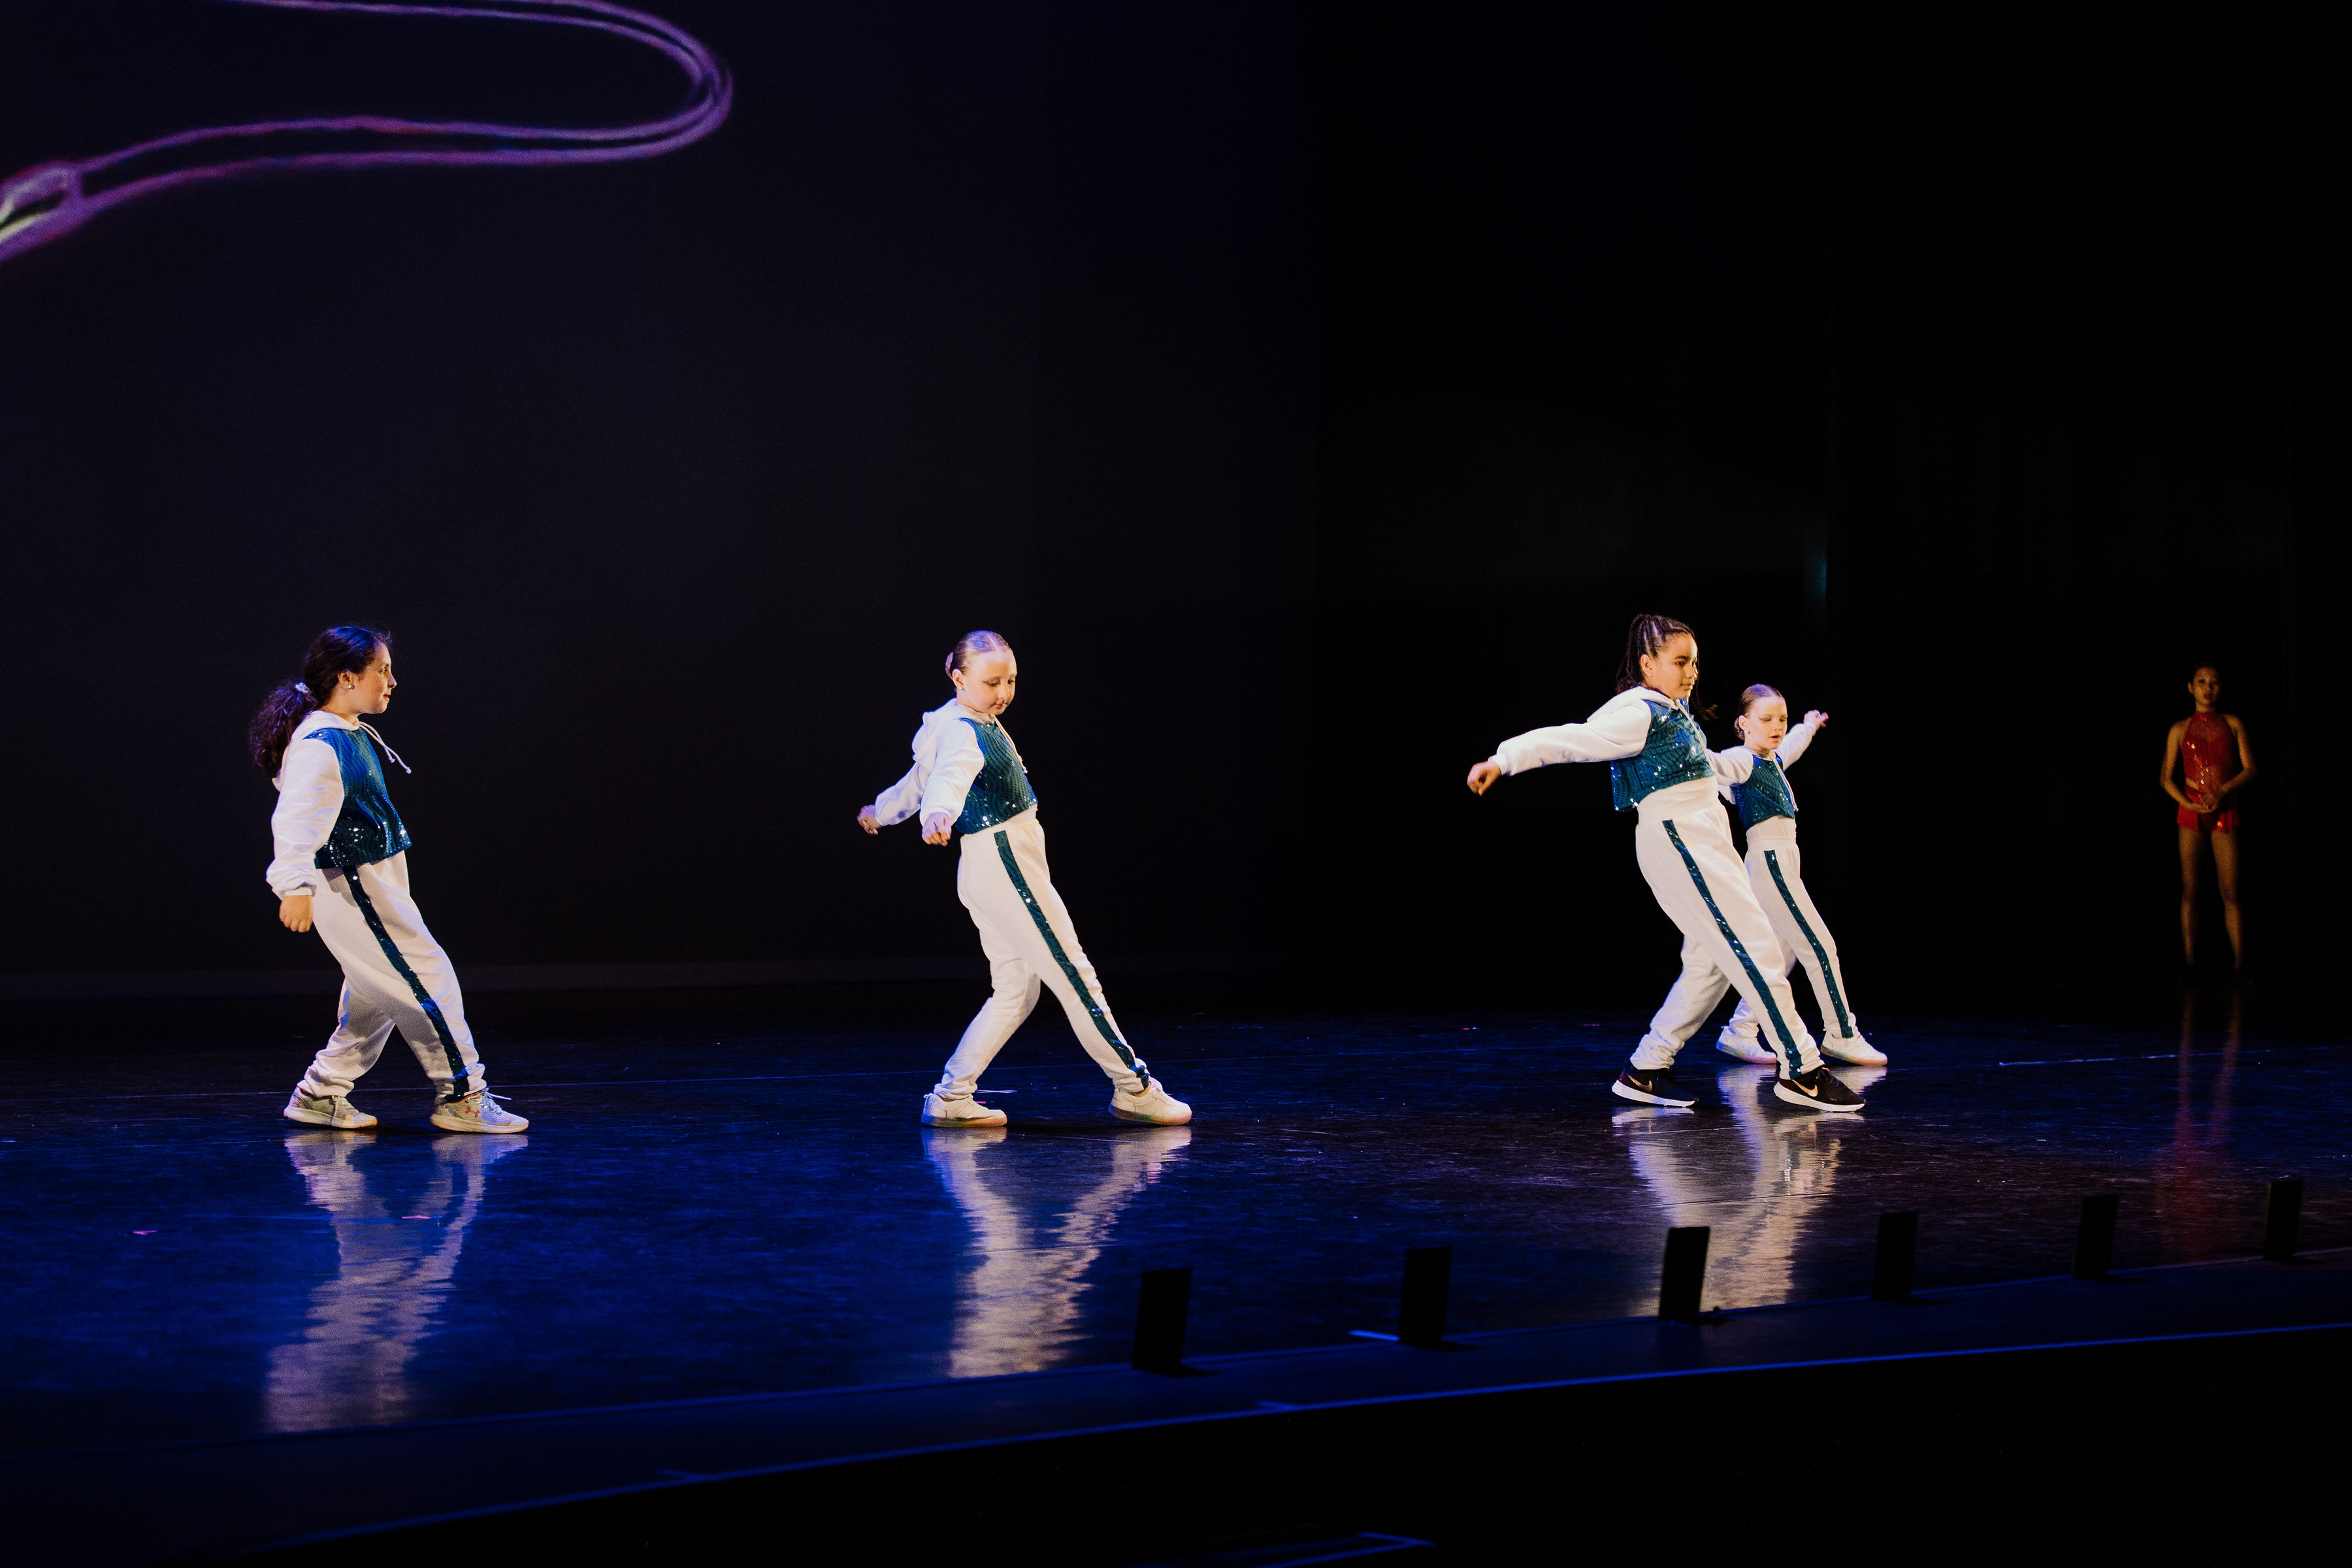 Four dancers performing a hip hop routine on stage